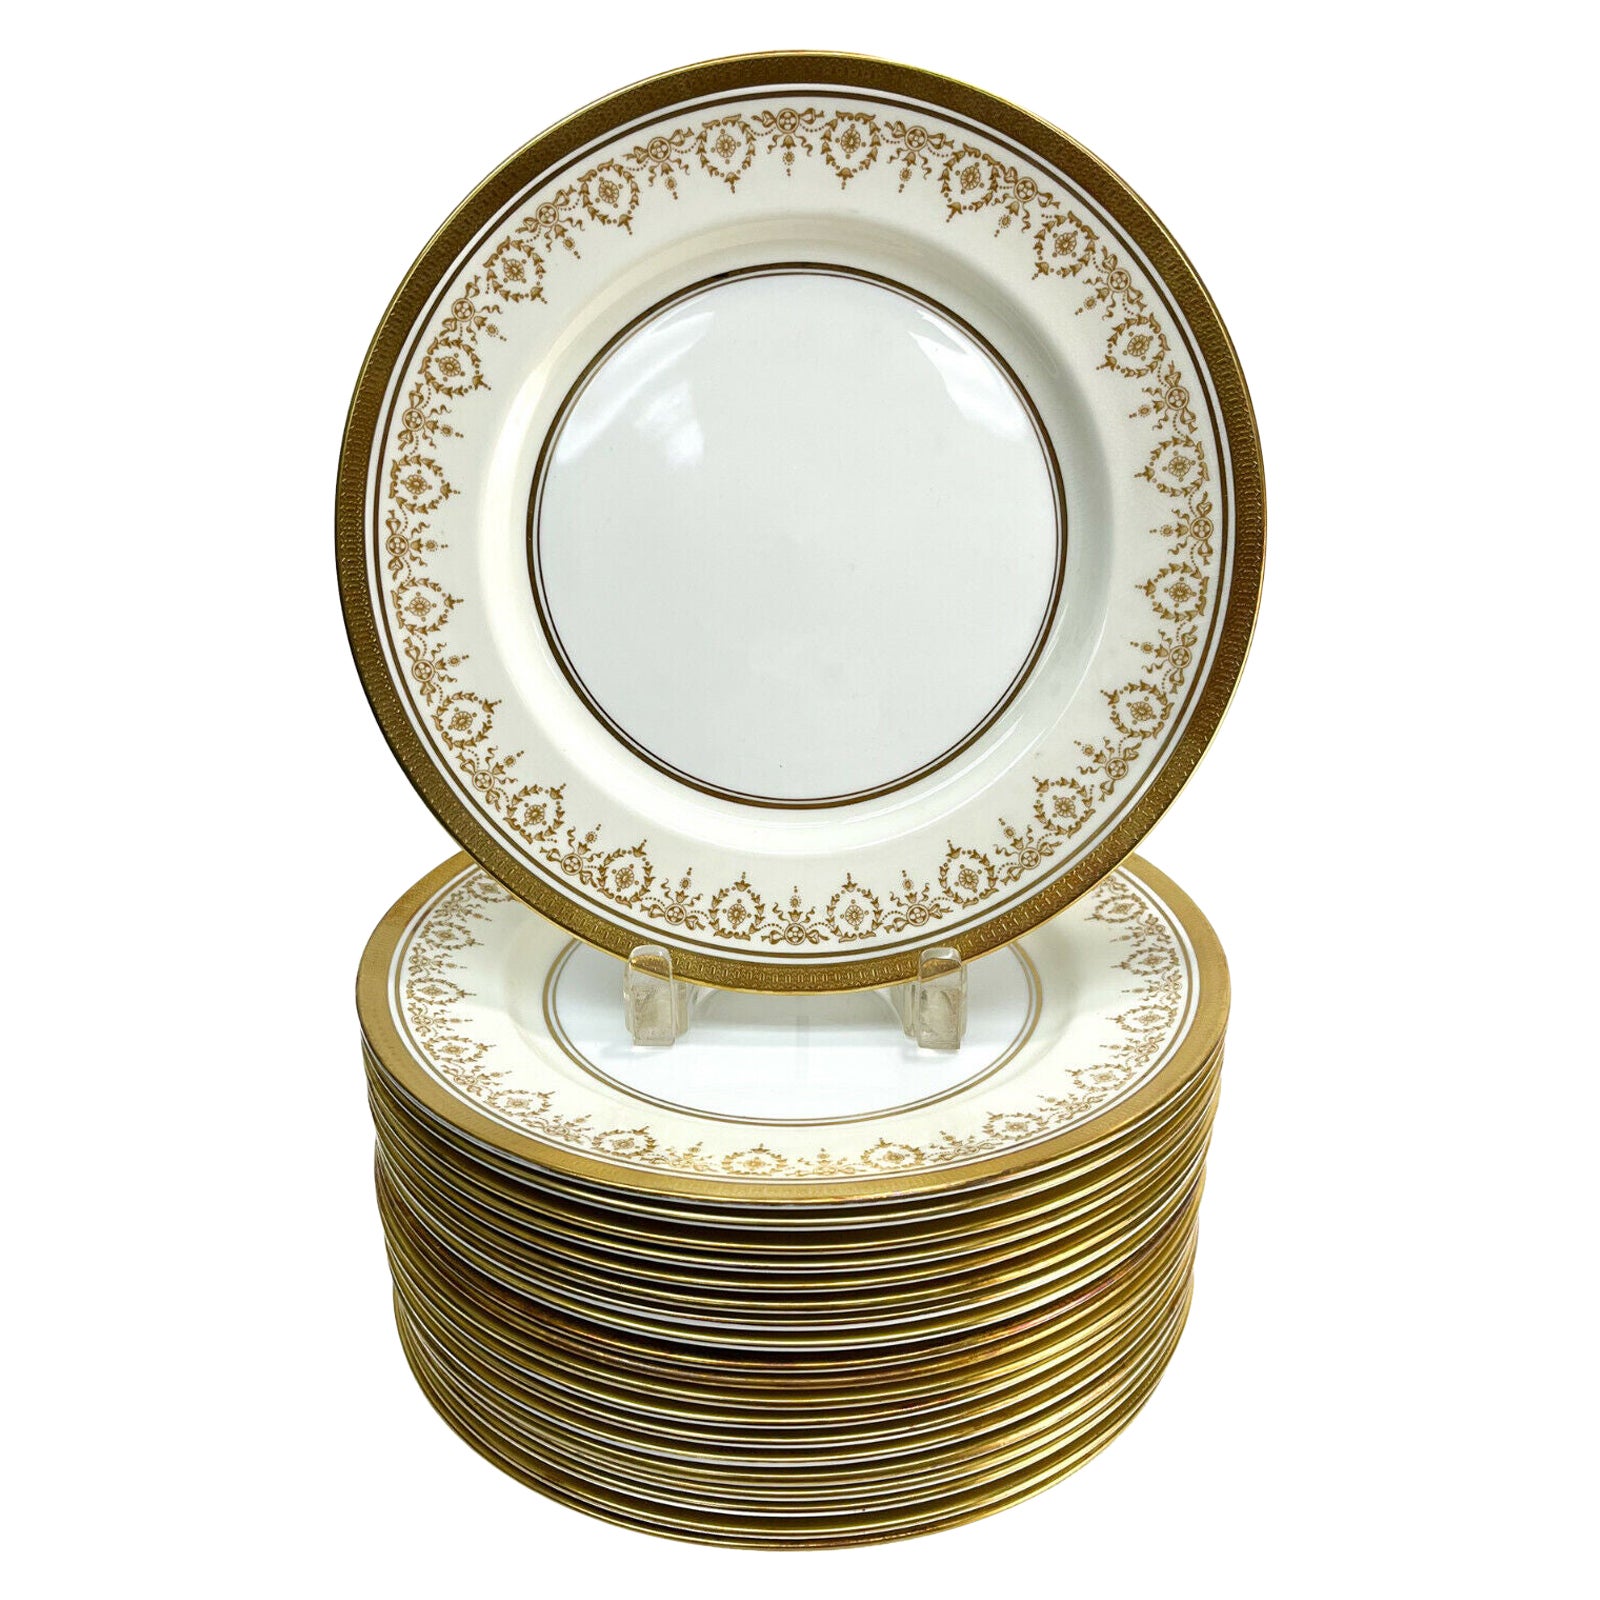 Set of 20 Aynsley England Porcelain Dinner Plates in Gold Dowery, circa 1960 For Sale